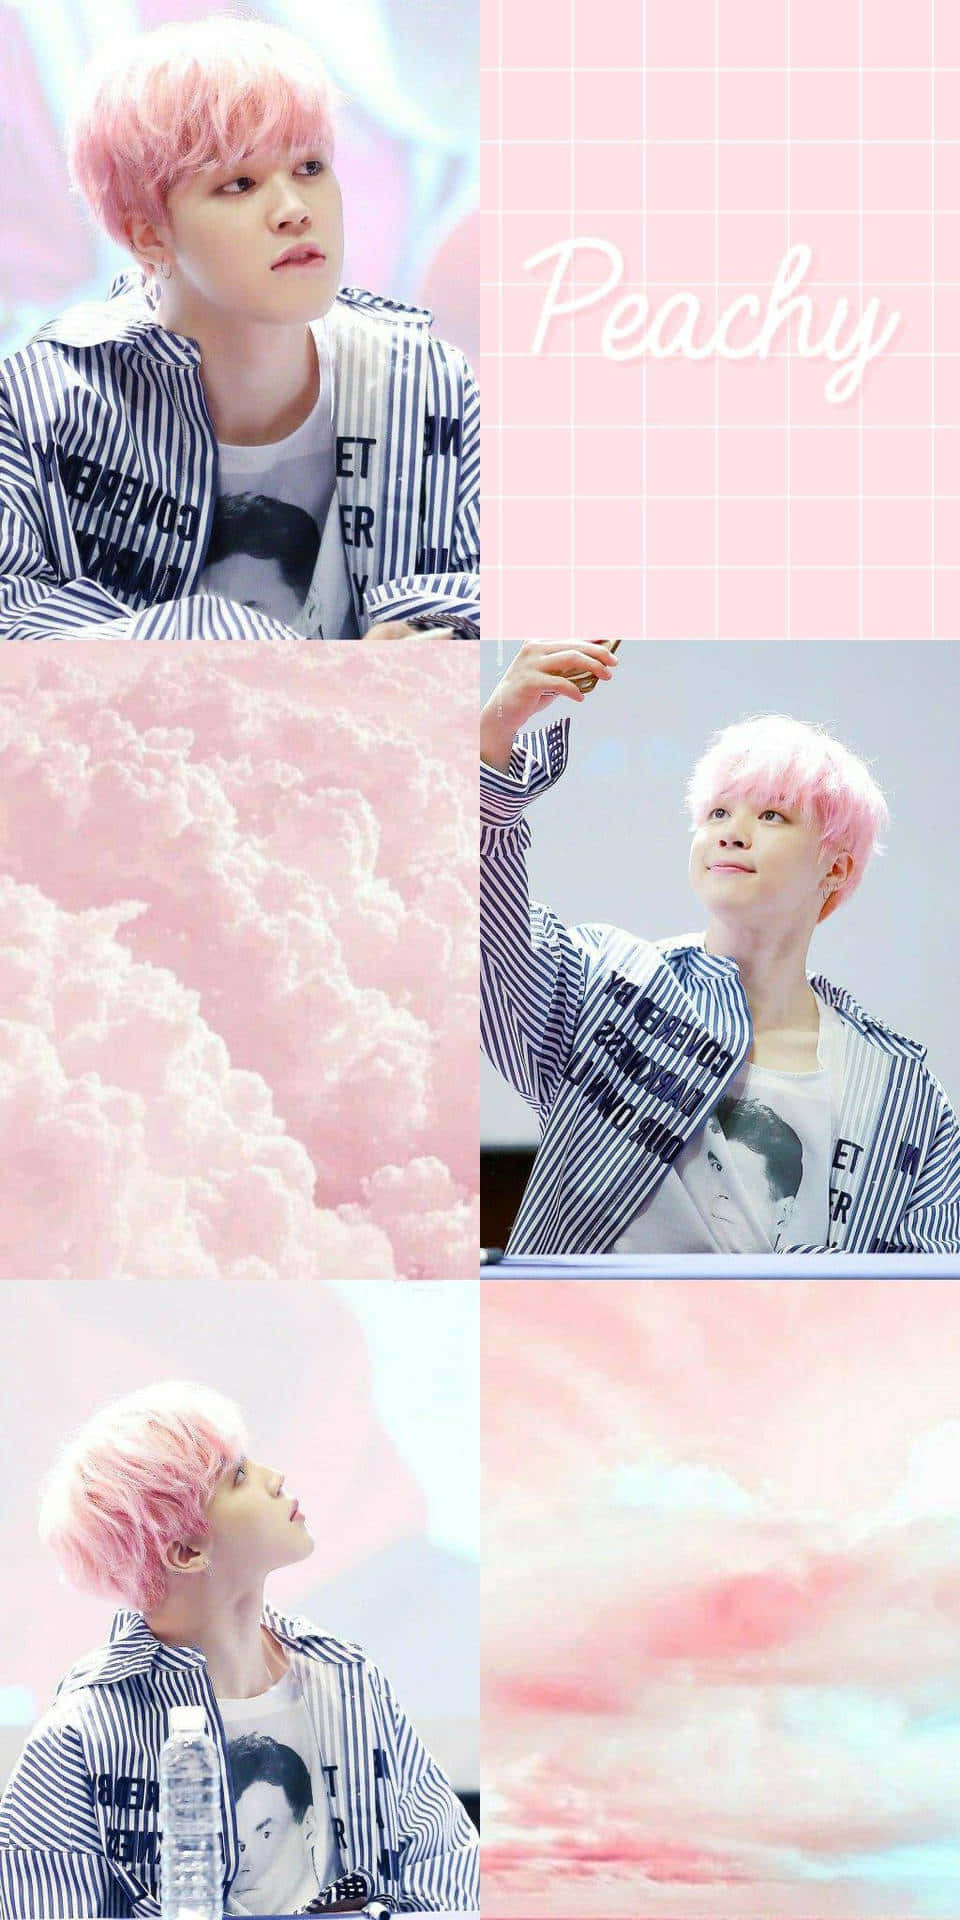 I made a wallpaper for Taehyung, I hope you like it! If you use it, please give credit! - Jimin